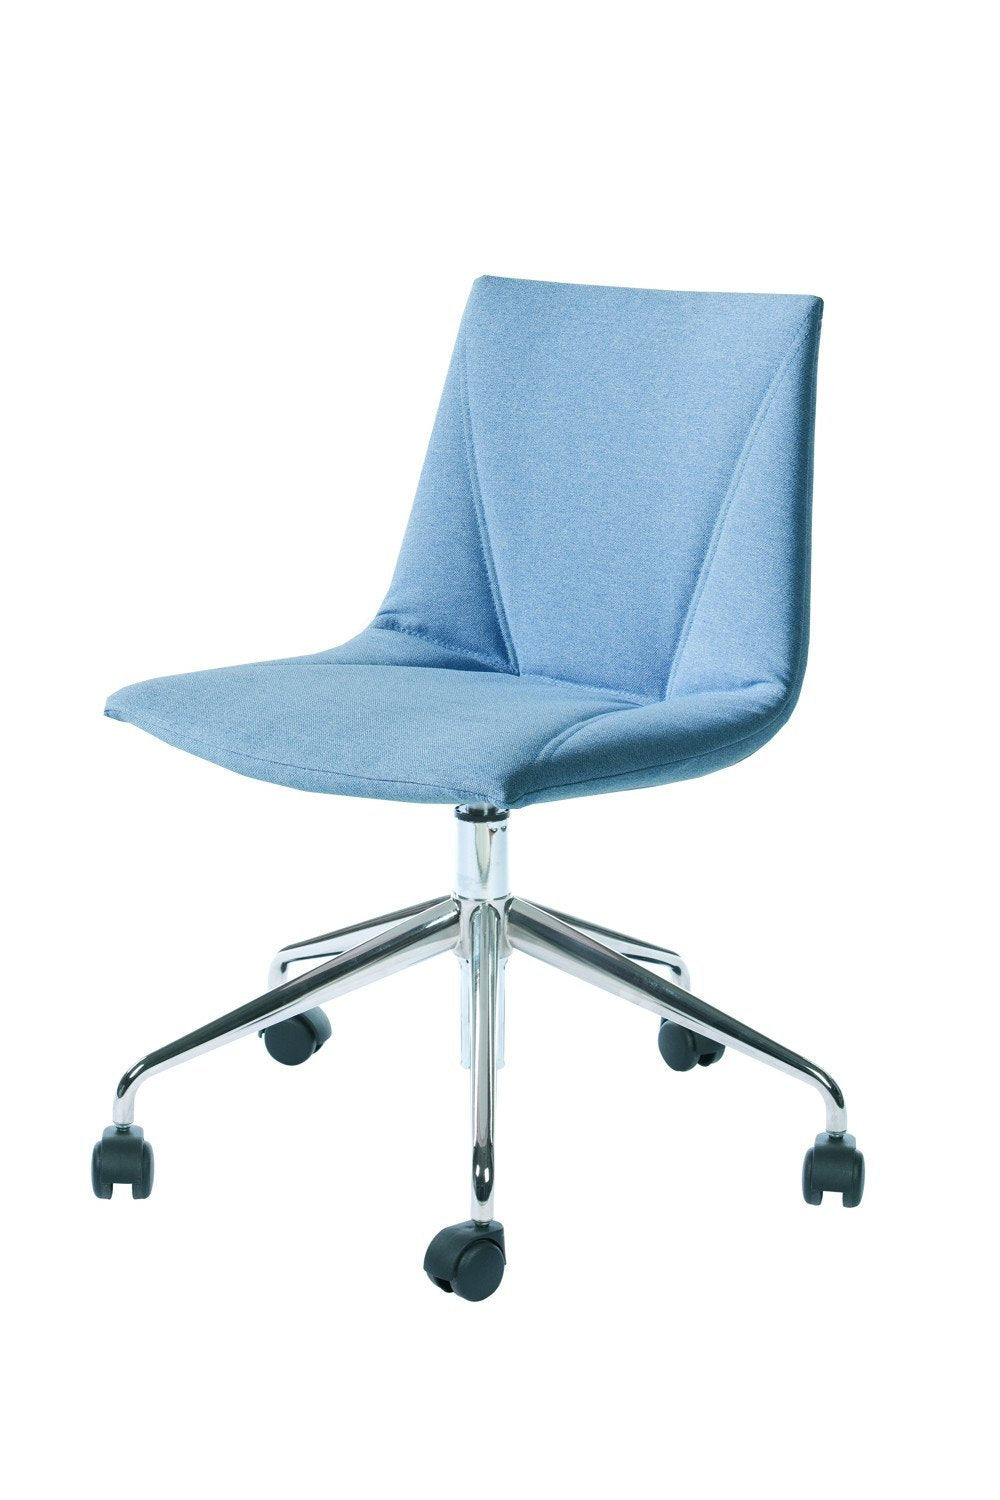 Colorfive Side Chair c/w Wheels-Gaber-Contract Furniture Store